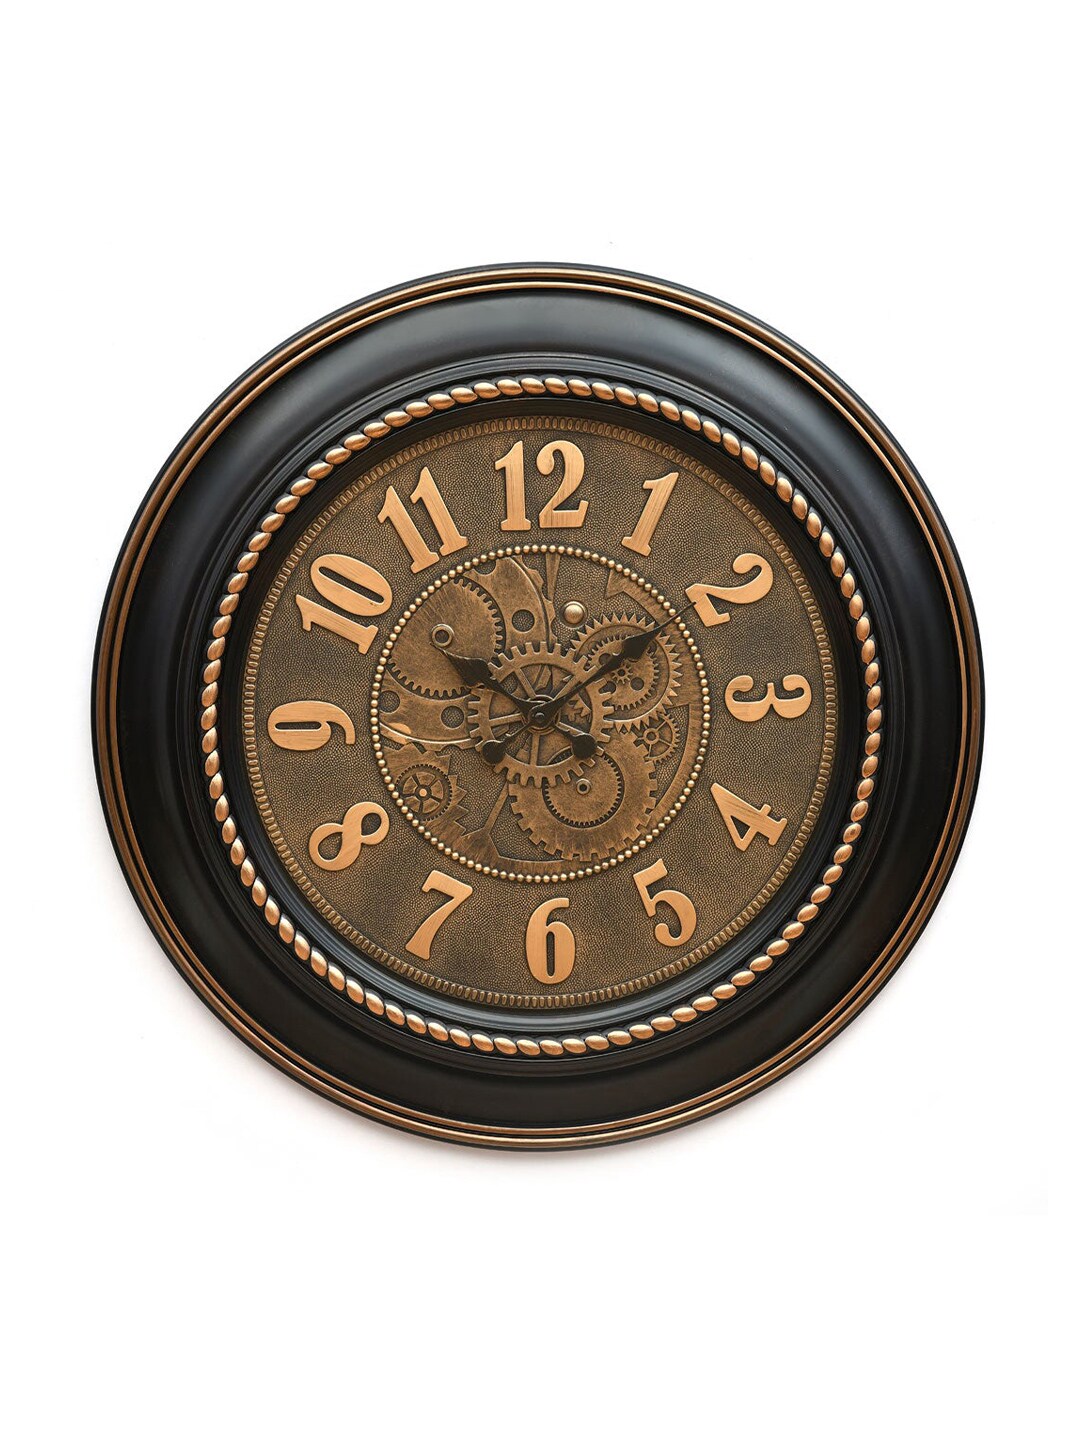 Athome by Nilkamal Black Solid Antique Analogue Wall Clock Price in India